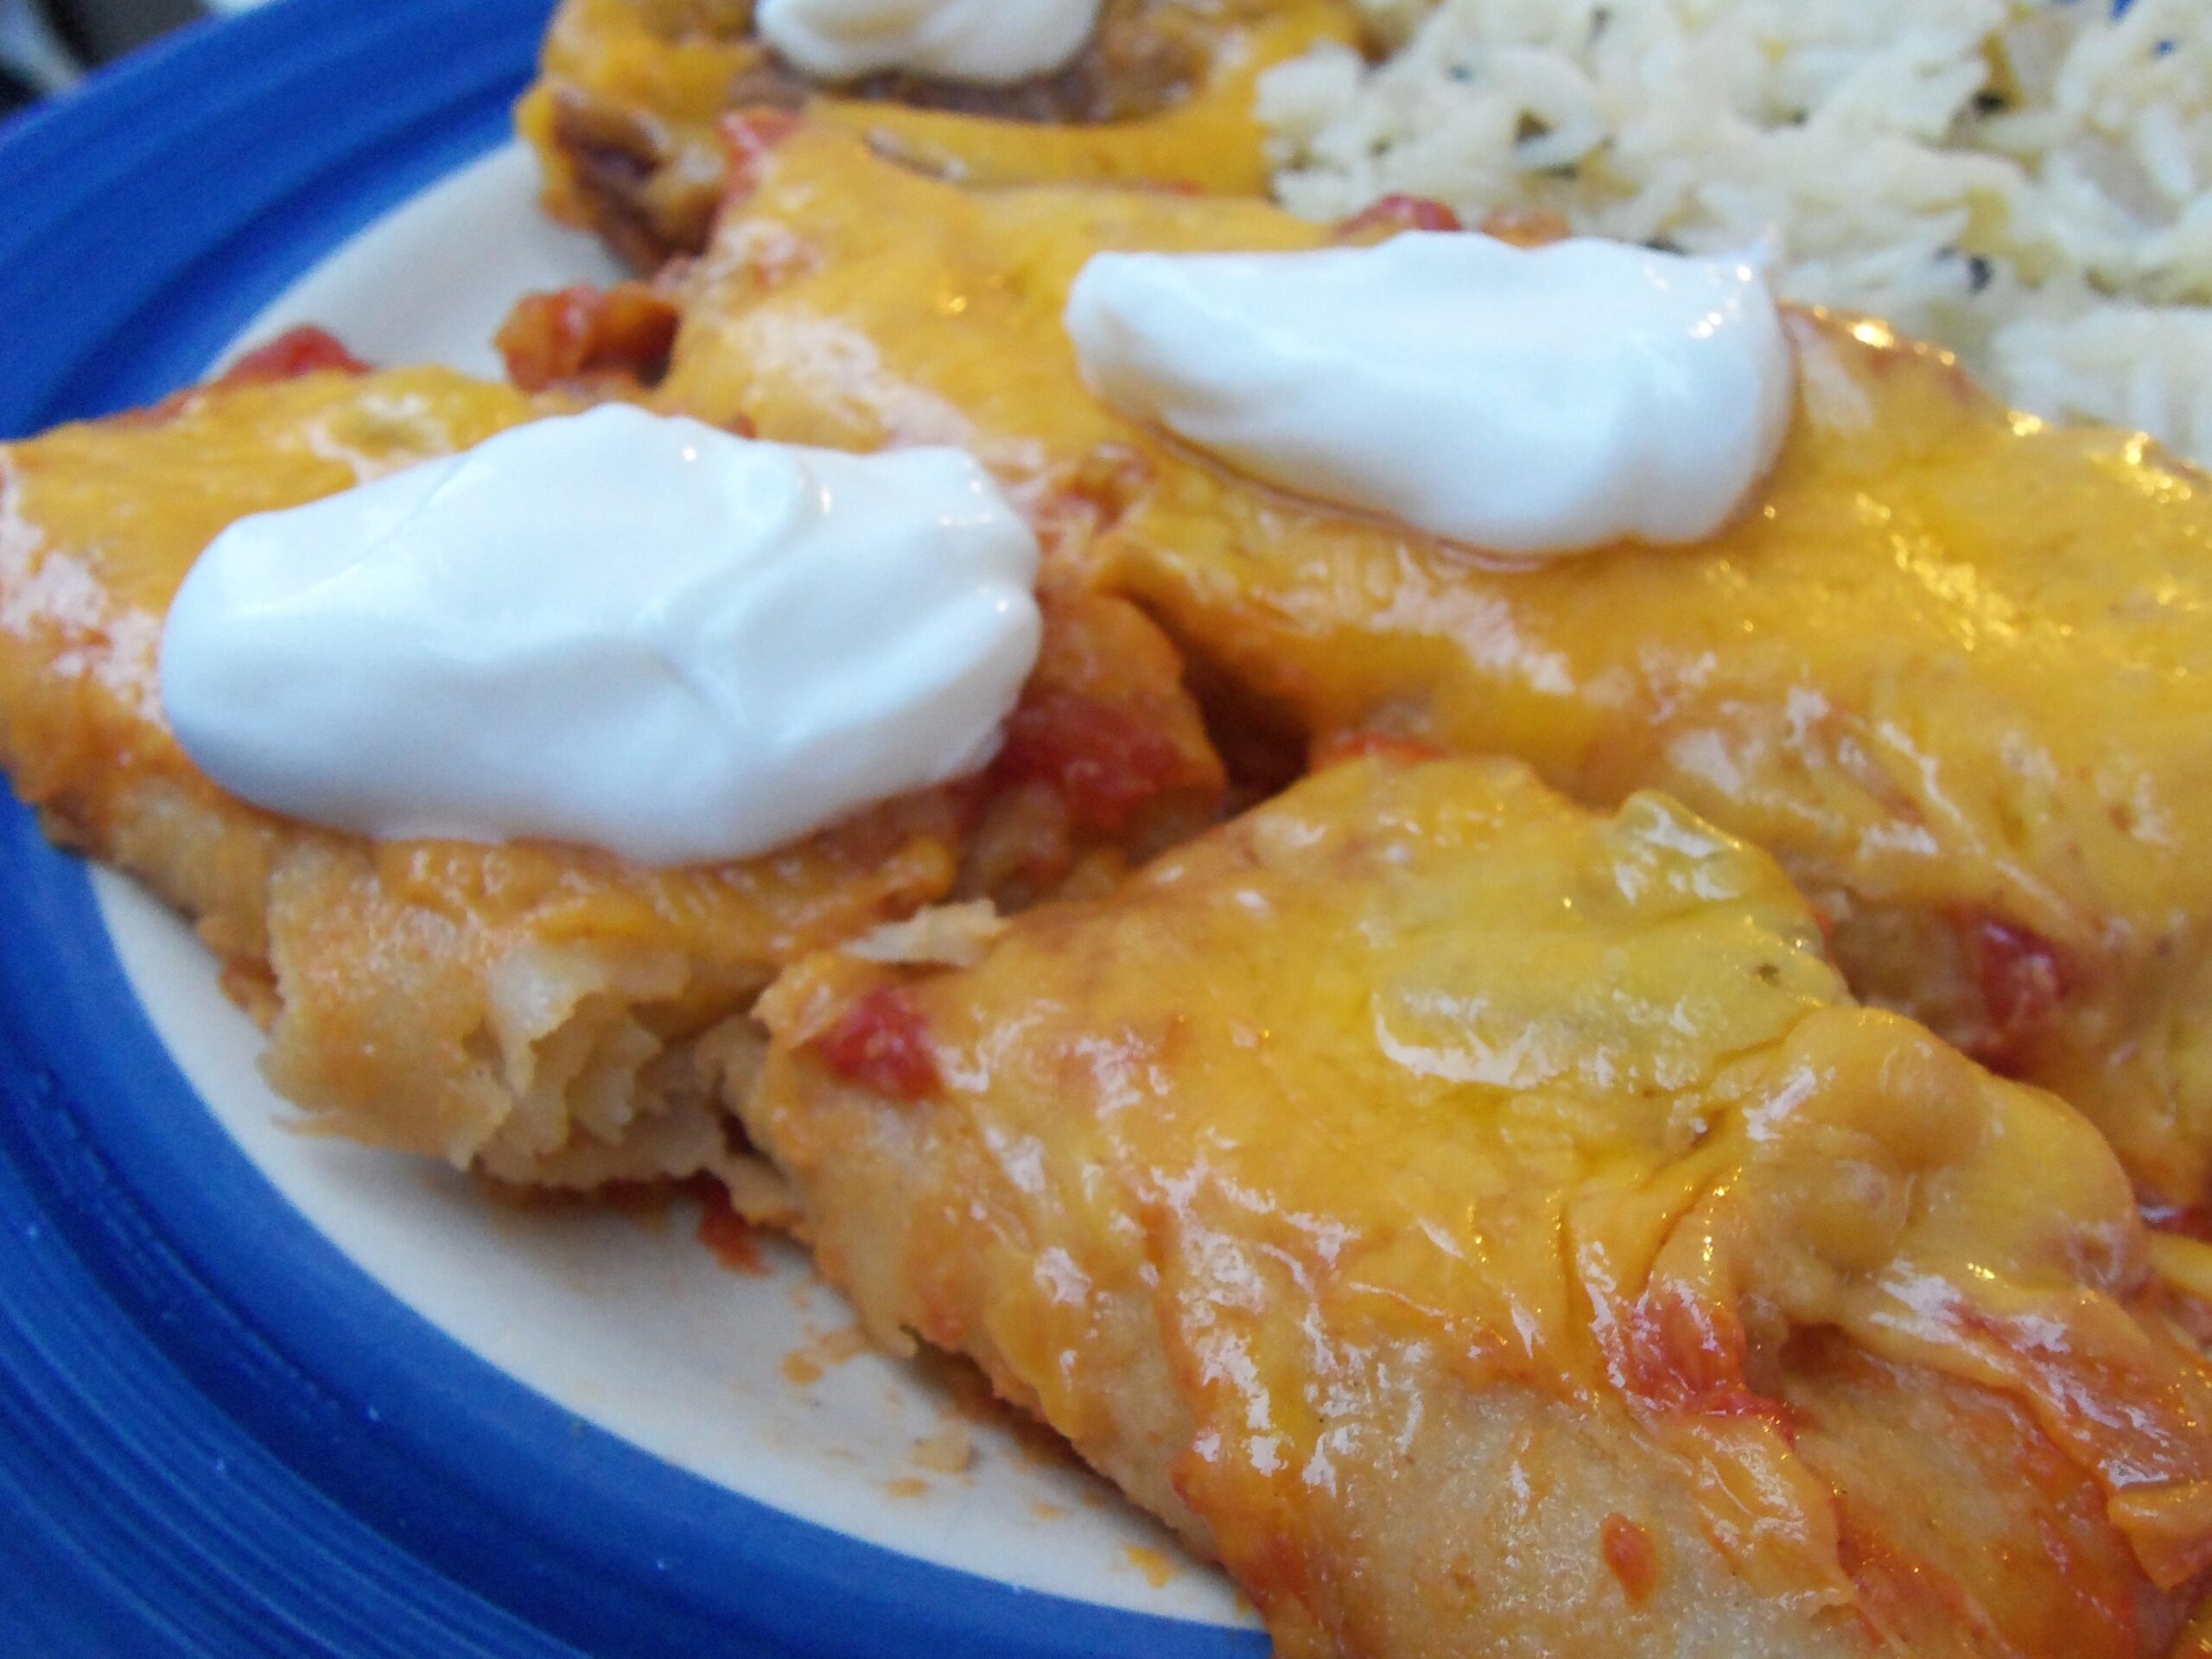  Satisfy your Mexican food cravings with these cheesy enchiladas!